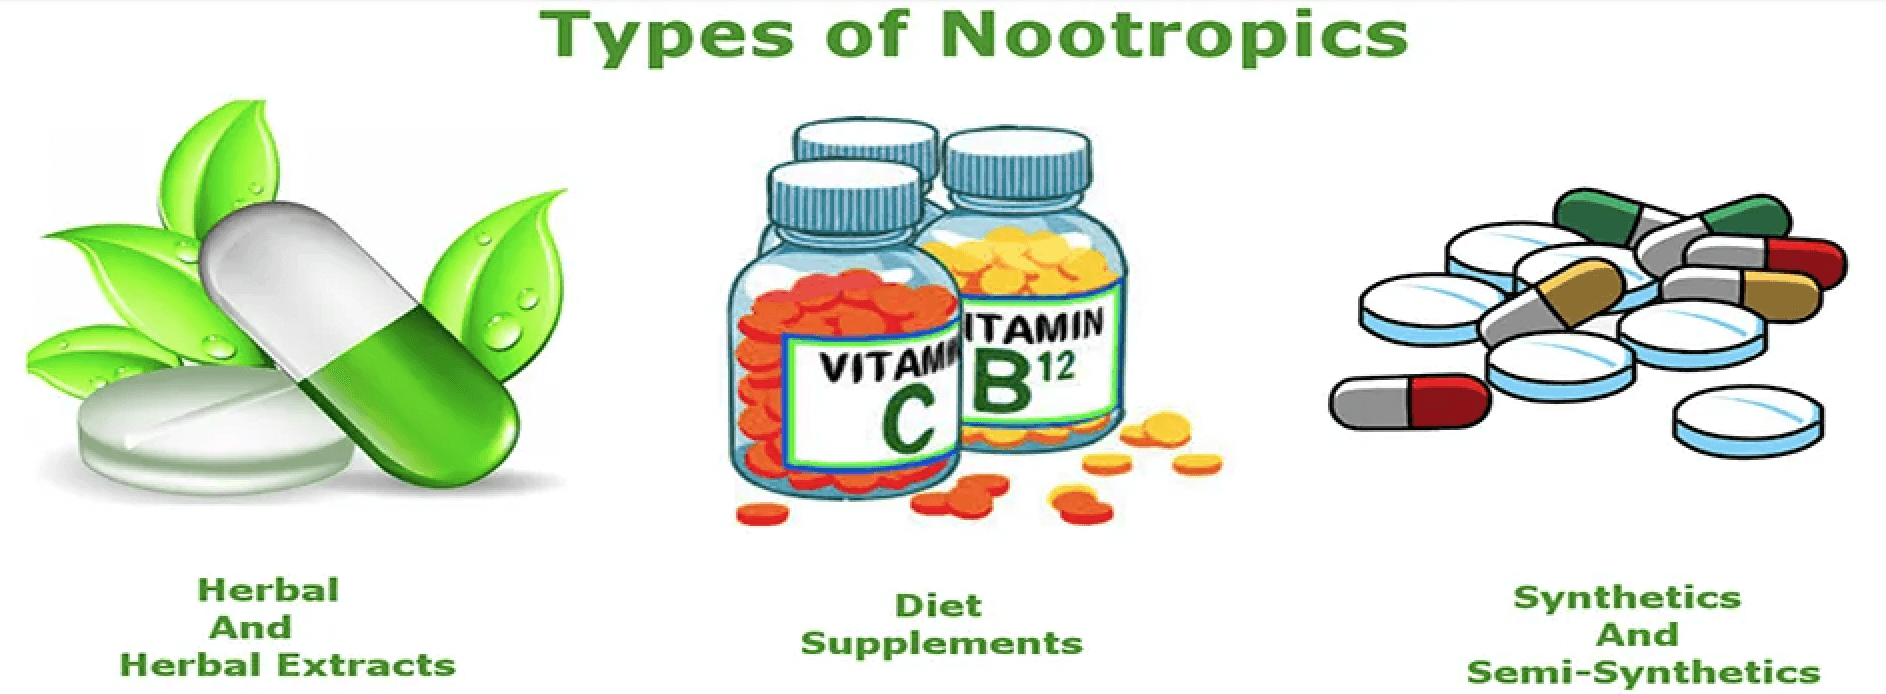 What Are Nootropics And Different Types Of Nootropics?